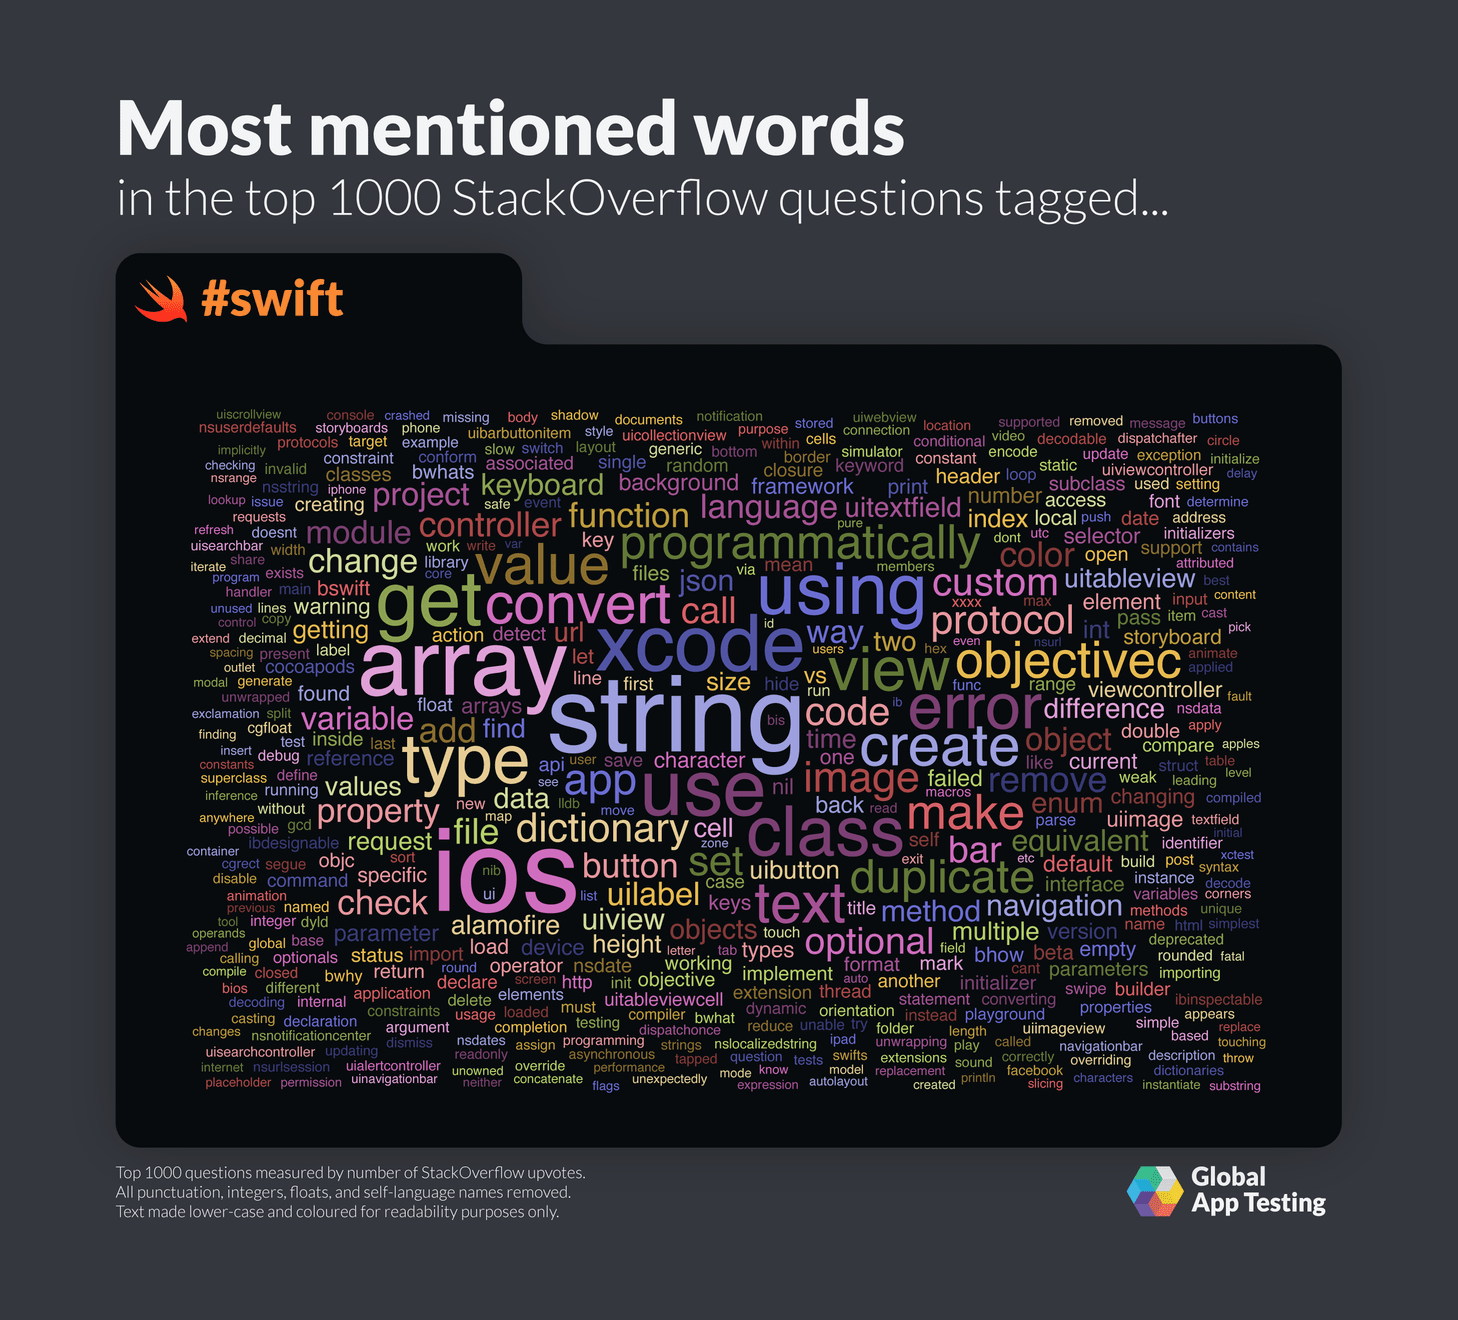 Most mentioned words for Swift on StackOverflow.